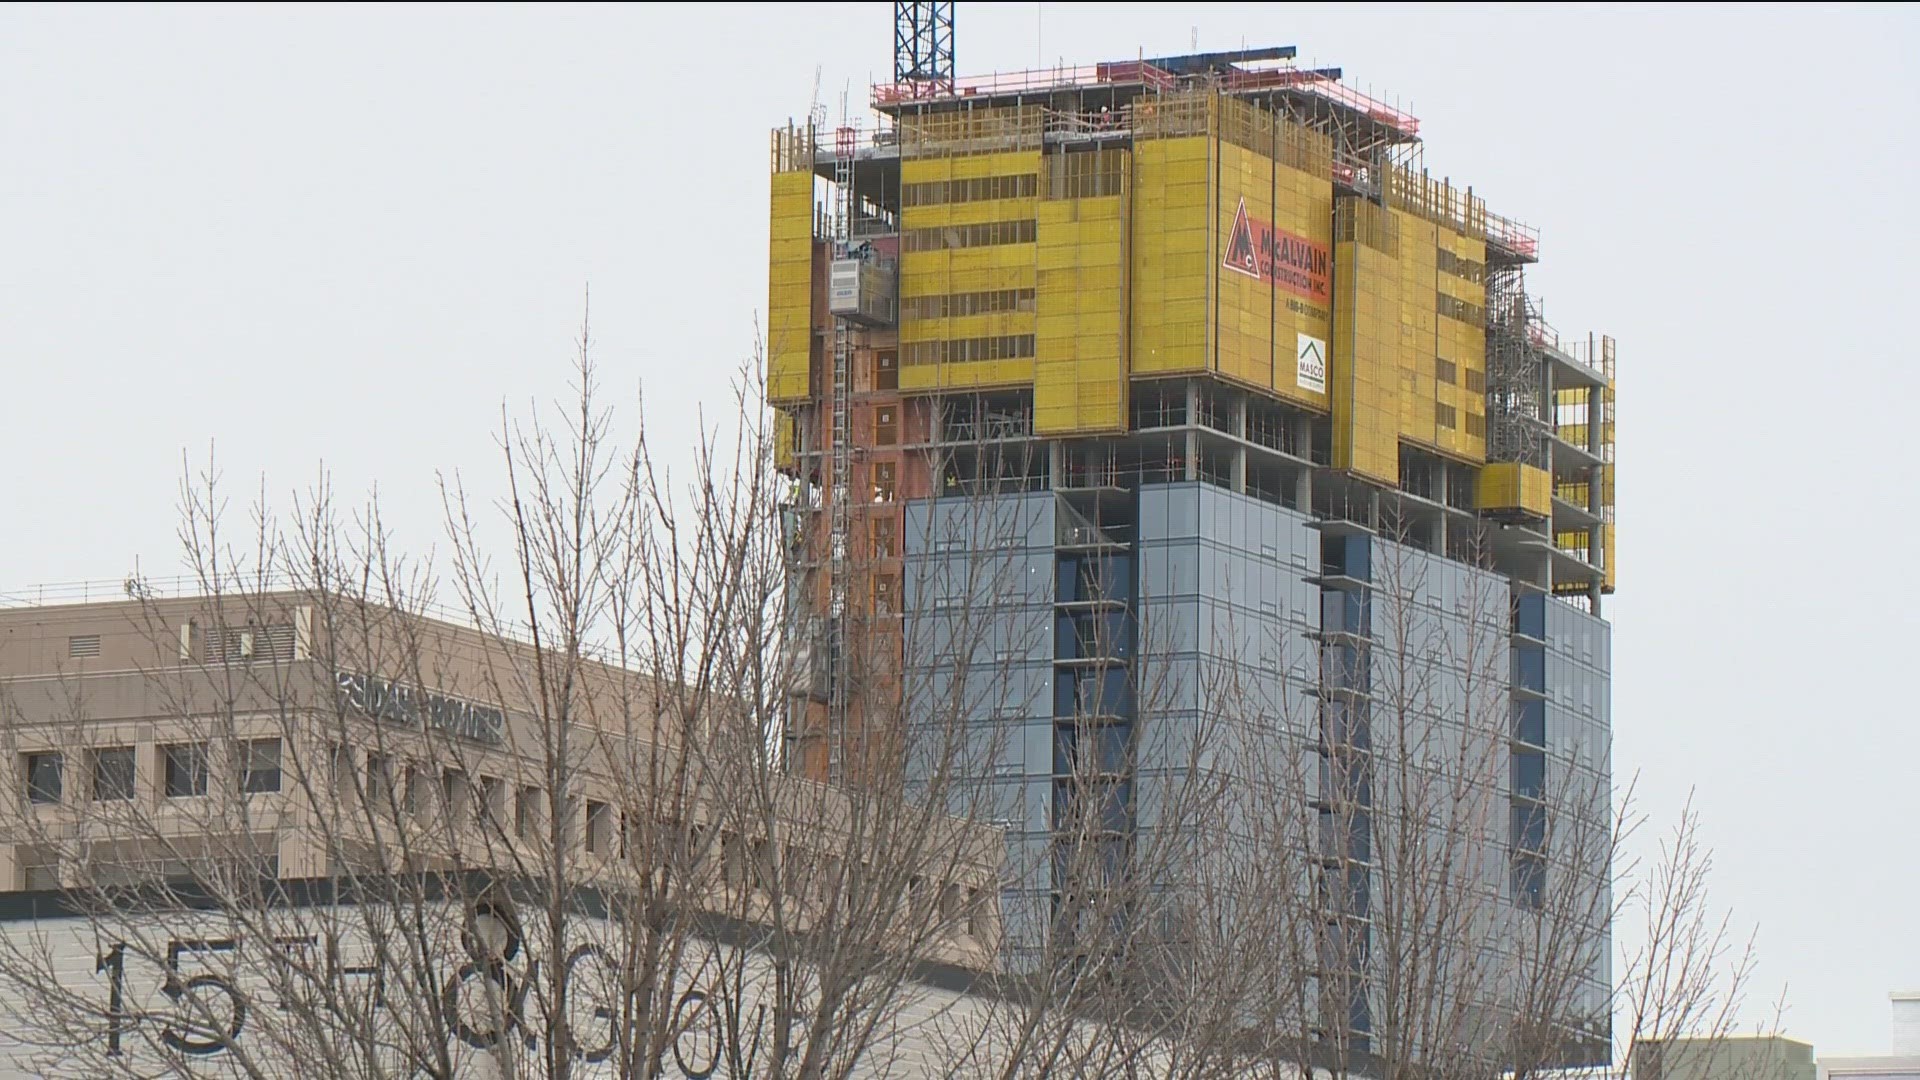 The Oppenheimer Development Corporation, which is leading the project, named the building the "Arthur."